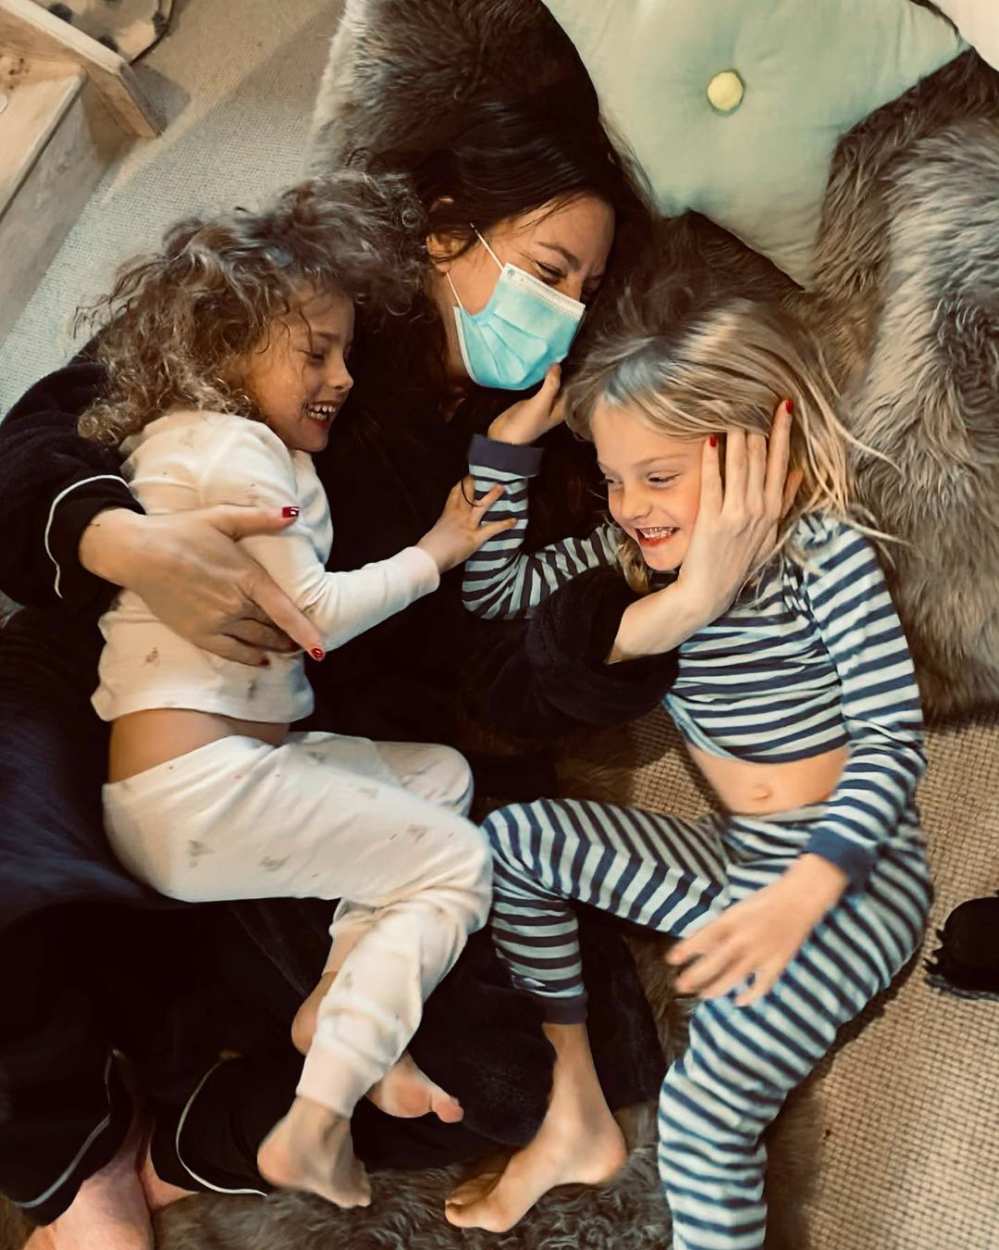 Liv Tyler Reveals Harrowing COVID-19 Battle as She Reunites With Her Kids After 'Wild 2 Weeks' in Quarantine